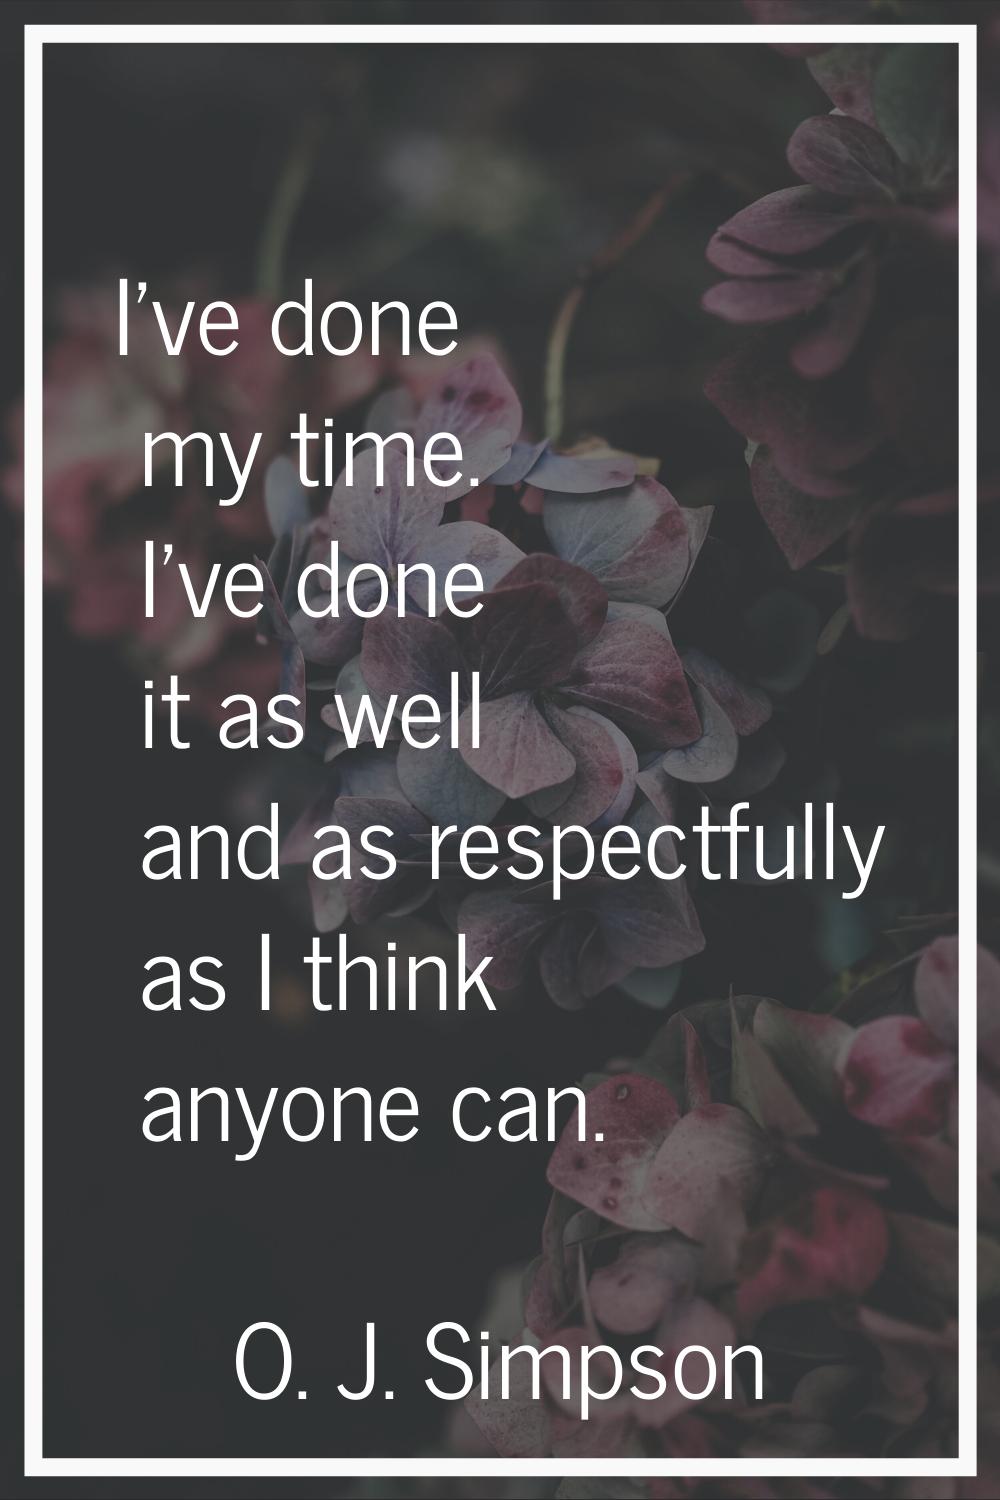 I've done my time. I've done it as well and as respectfully as I think anyone can.